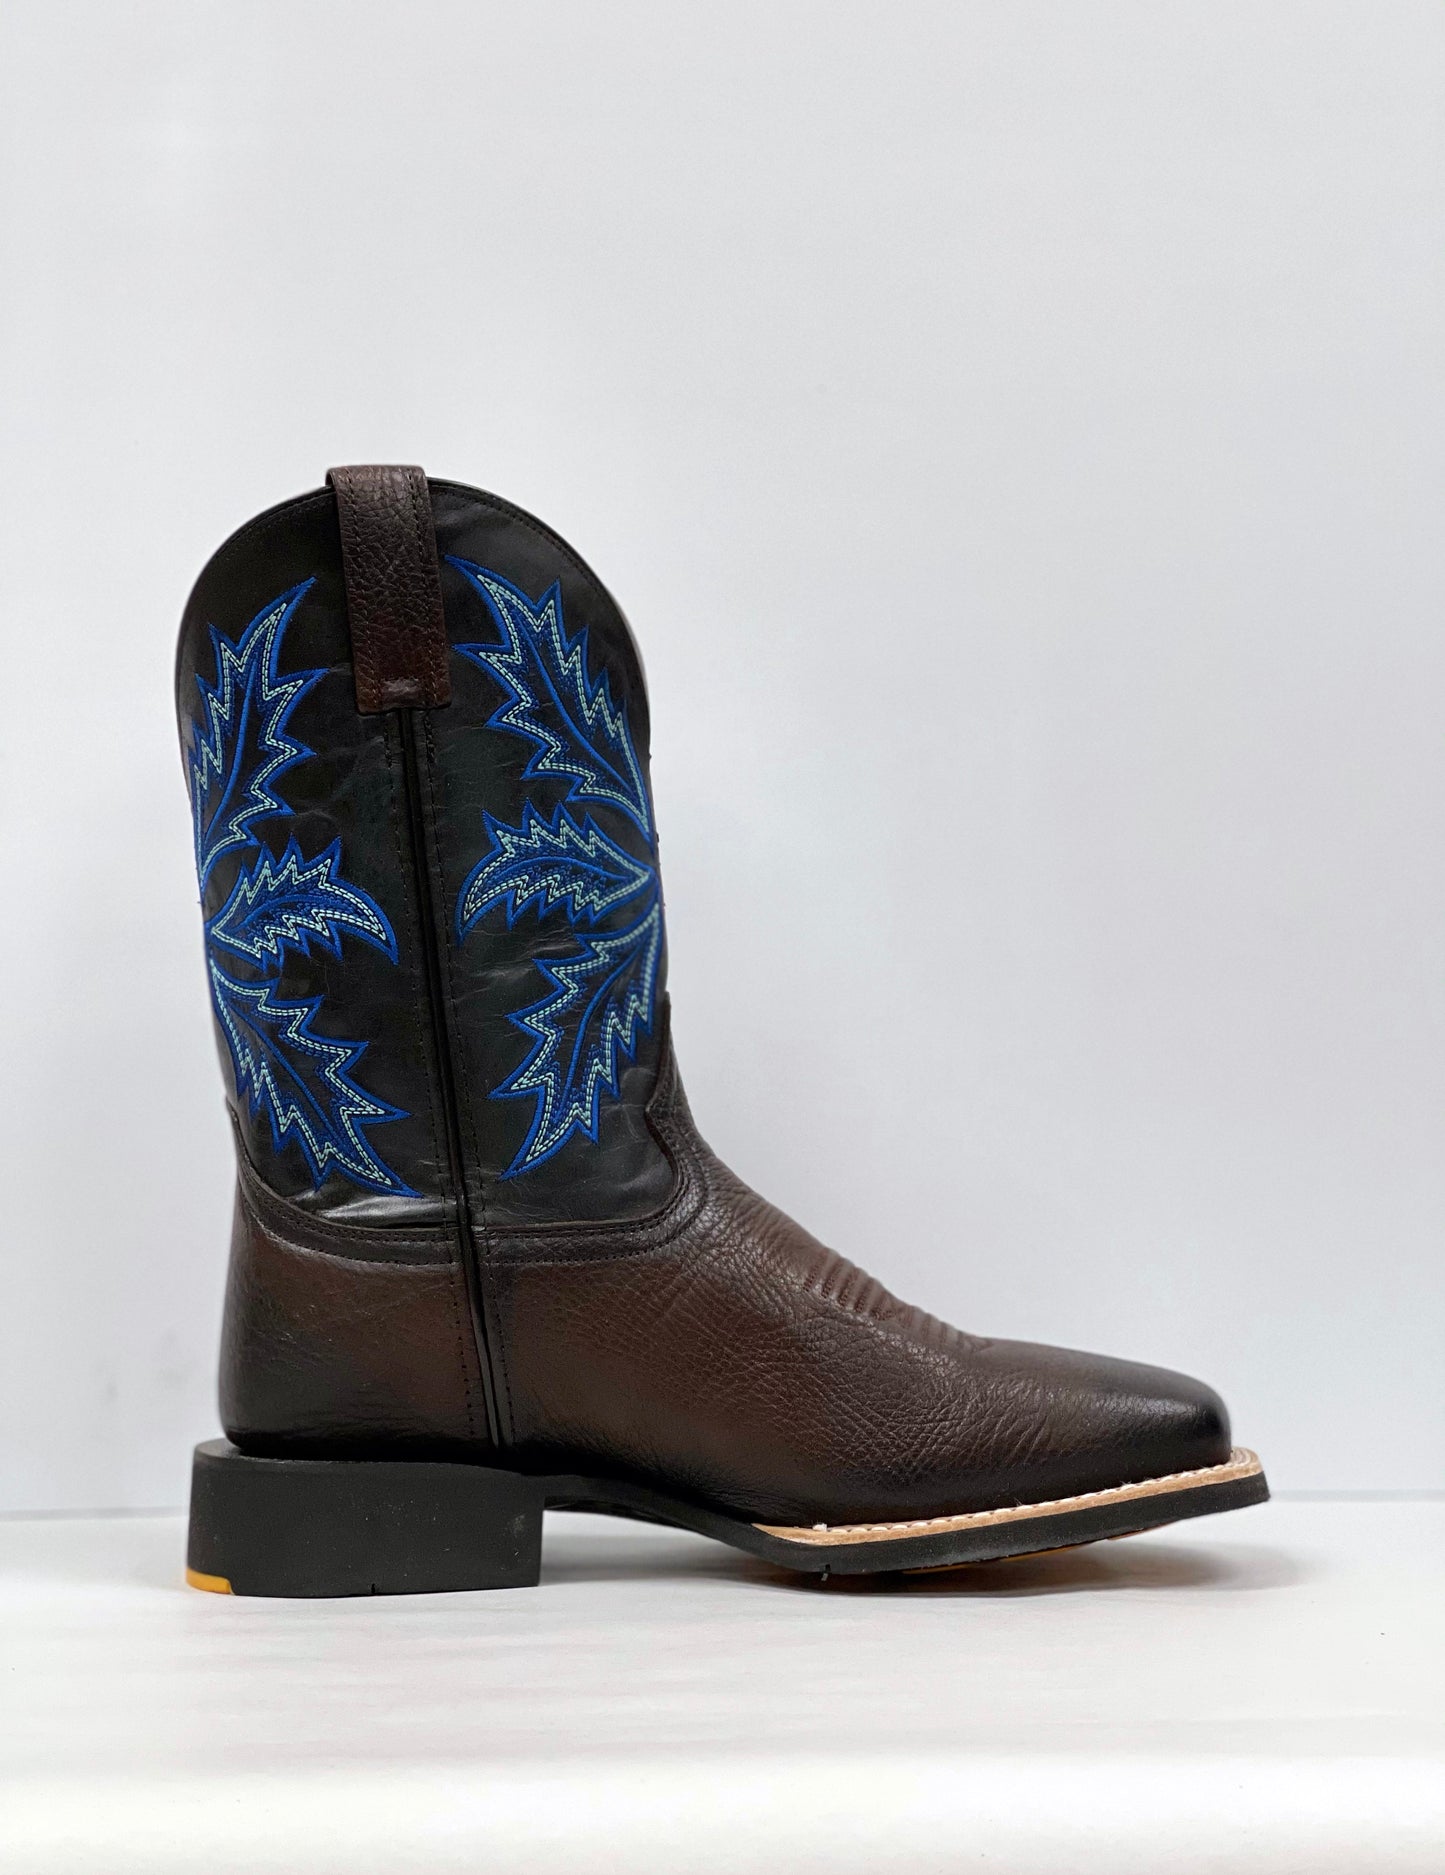 French's Music City Collection - Men's Shrunken Chocolate Boots